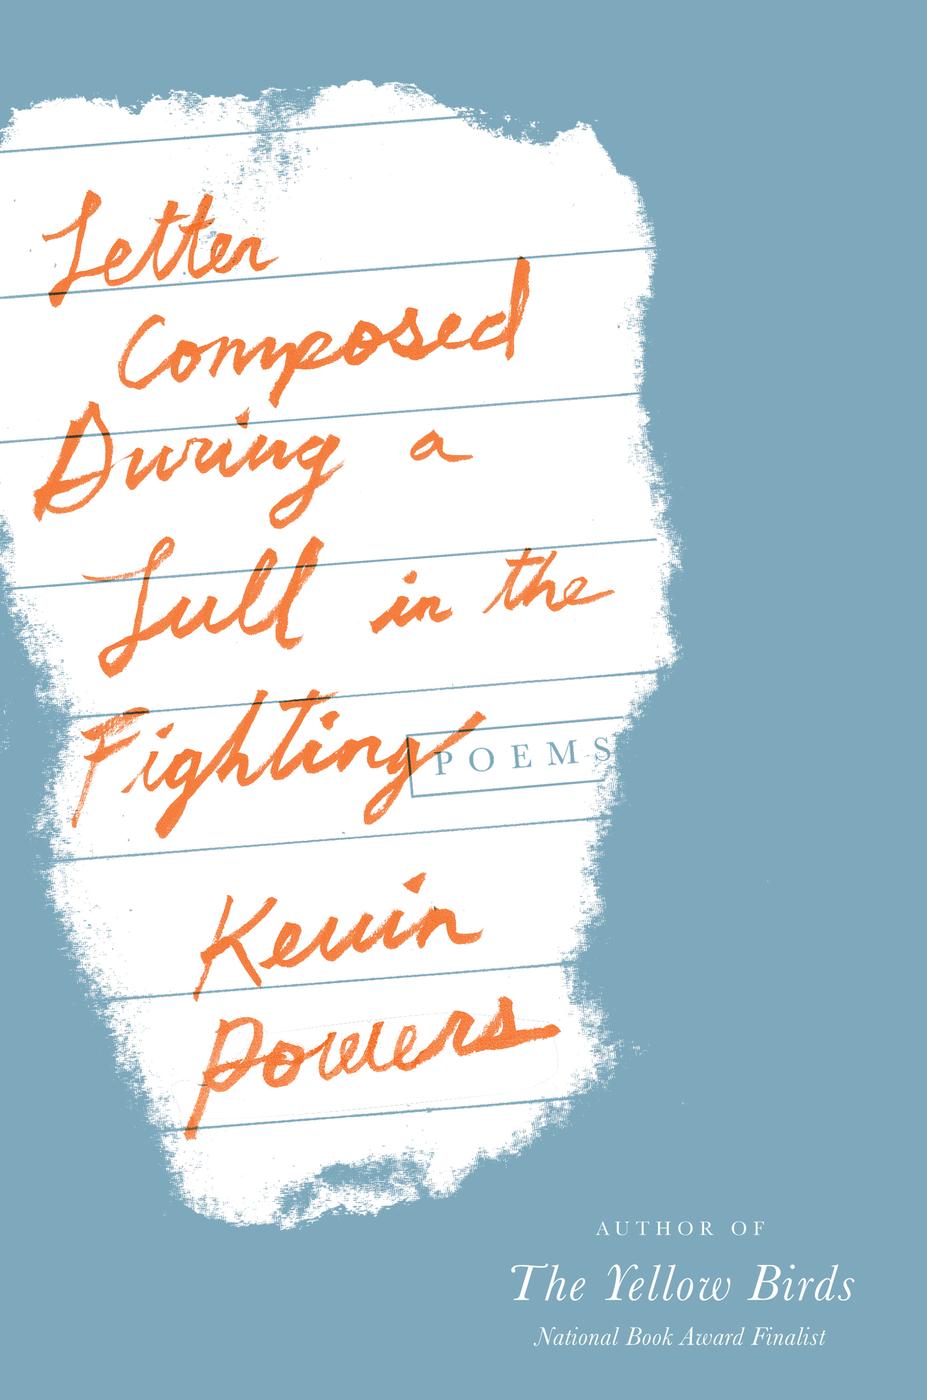 Letter Composed During a Lull in the Fighting (2014)